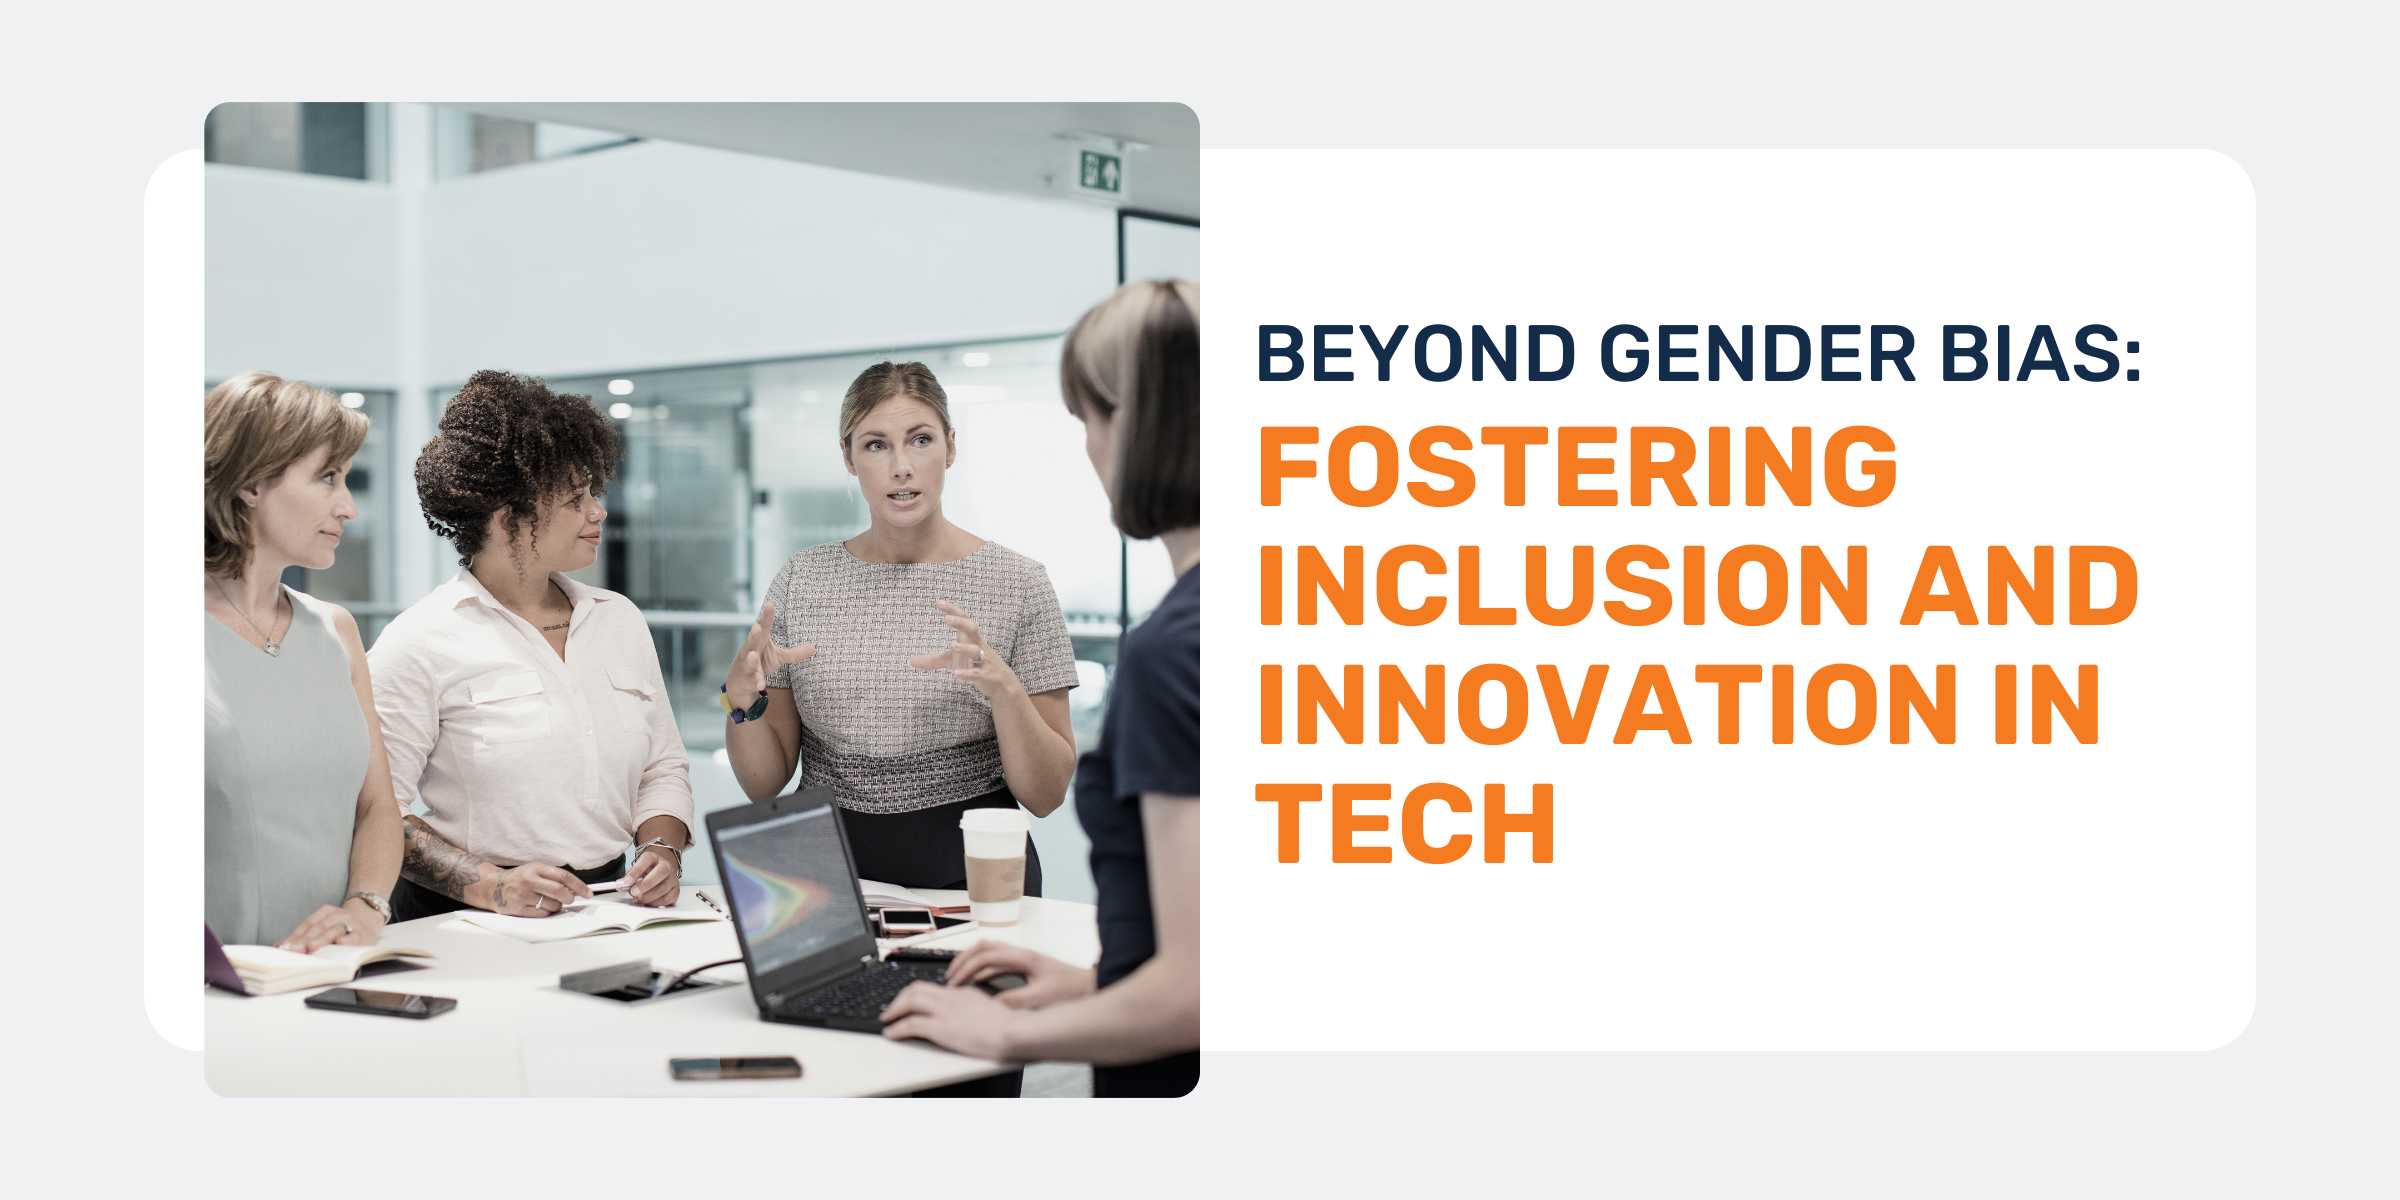 Beyond Gender Bias: Fostering Inclusion and Innovation in Tech